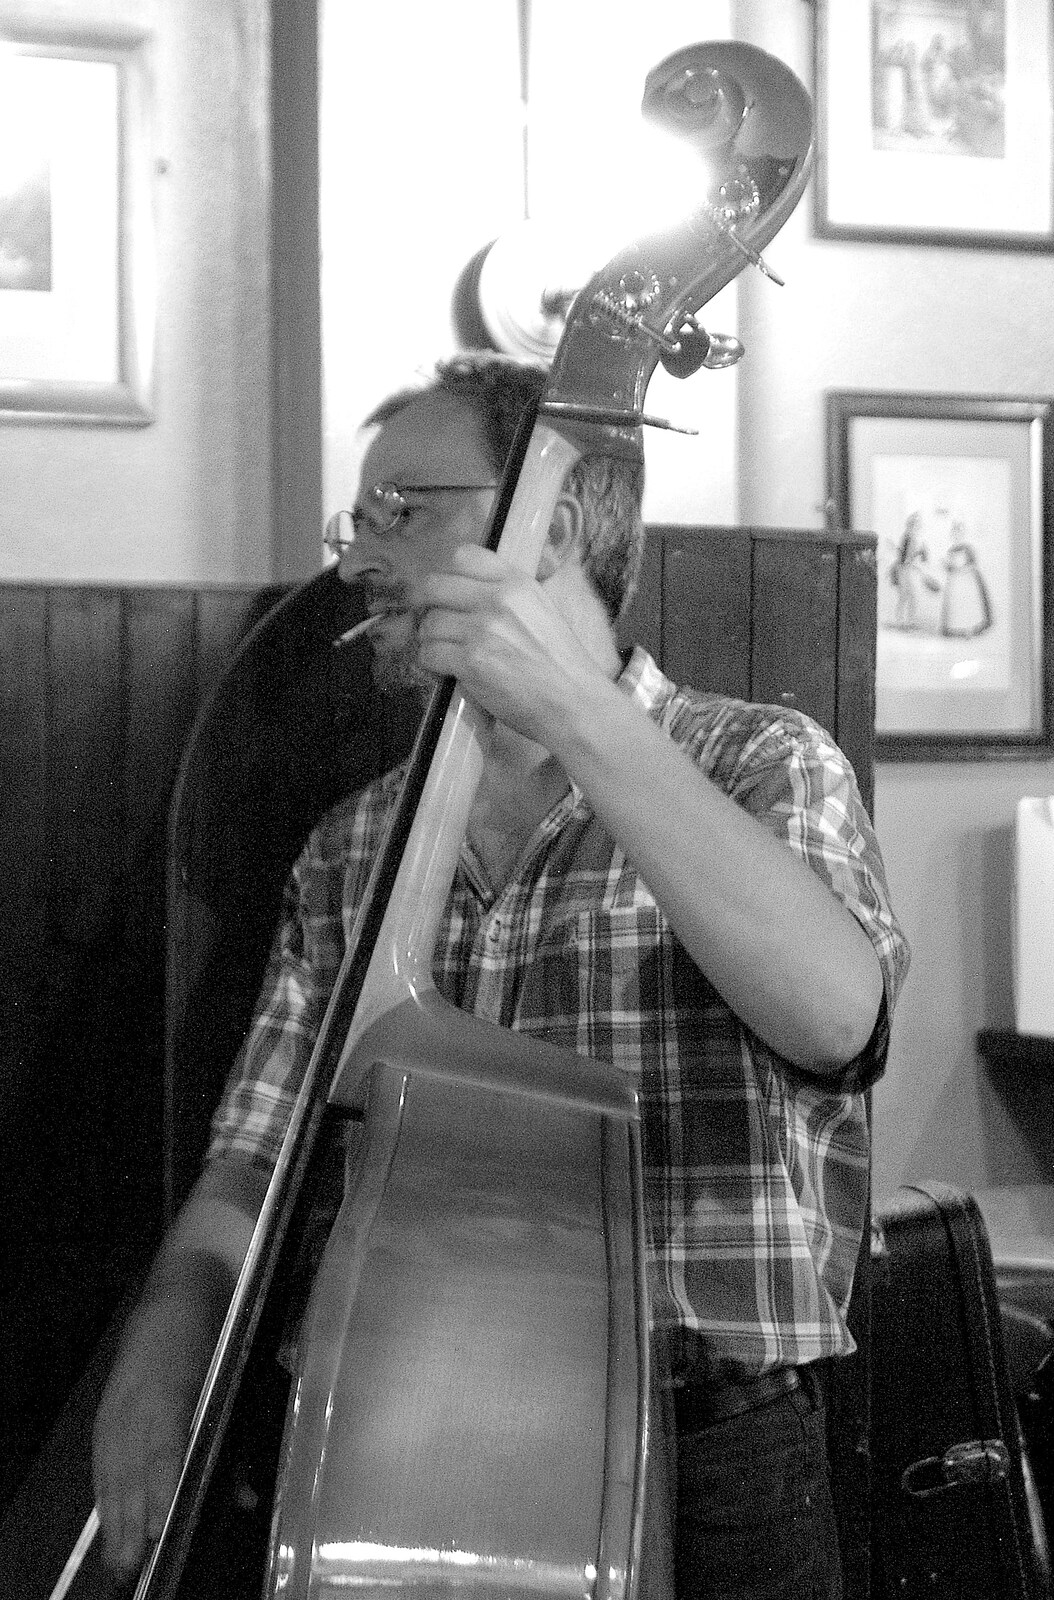 A double-bass adds to the sound from Baits Bite Lock, Folk Night at the Salisbury Arms, and Kebabs, Cambridge - 12th September 2006